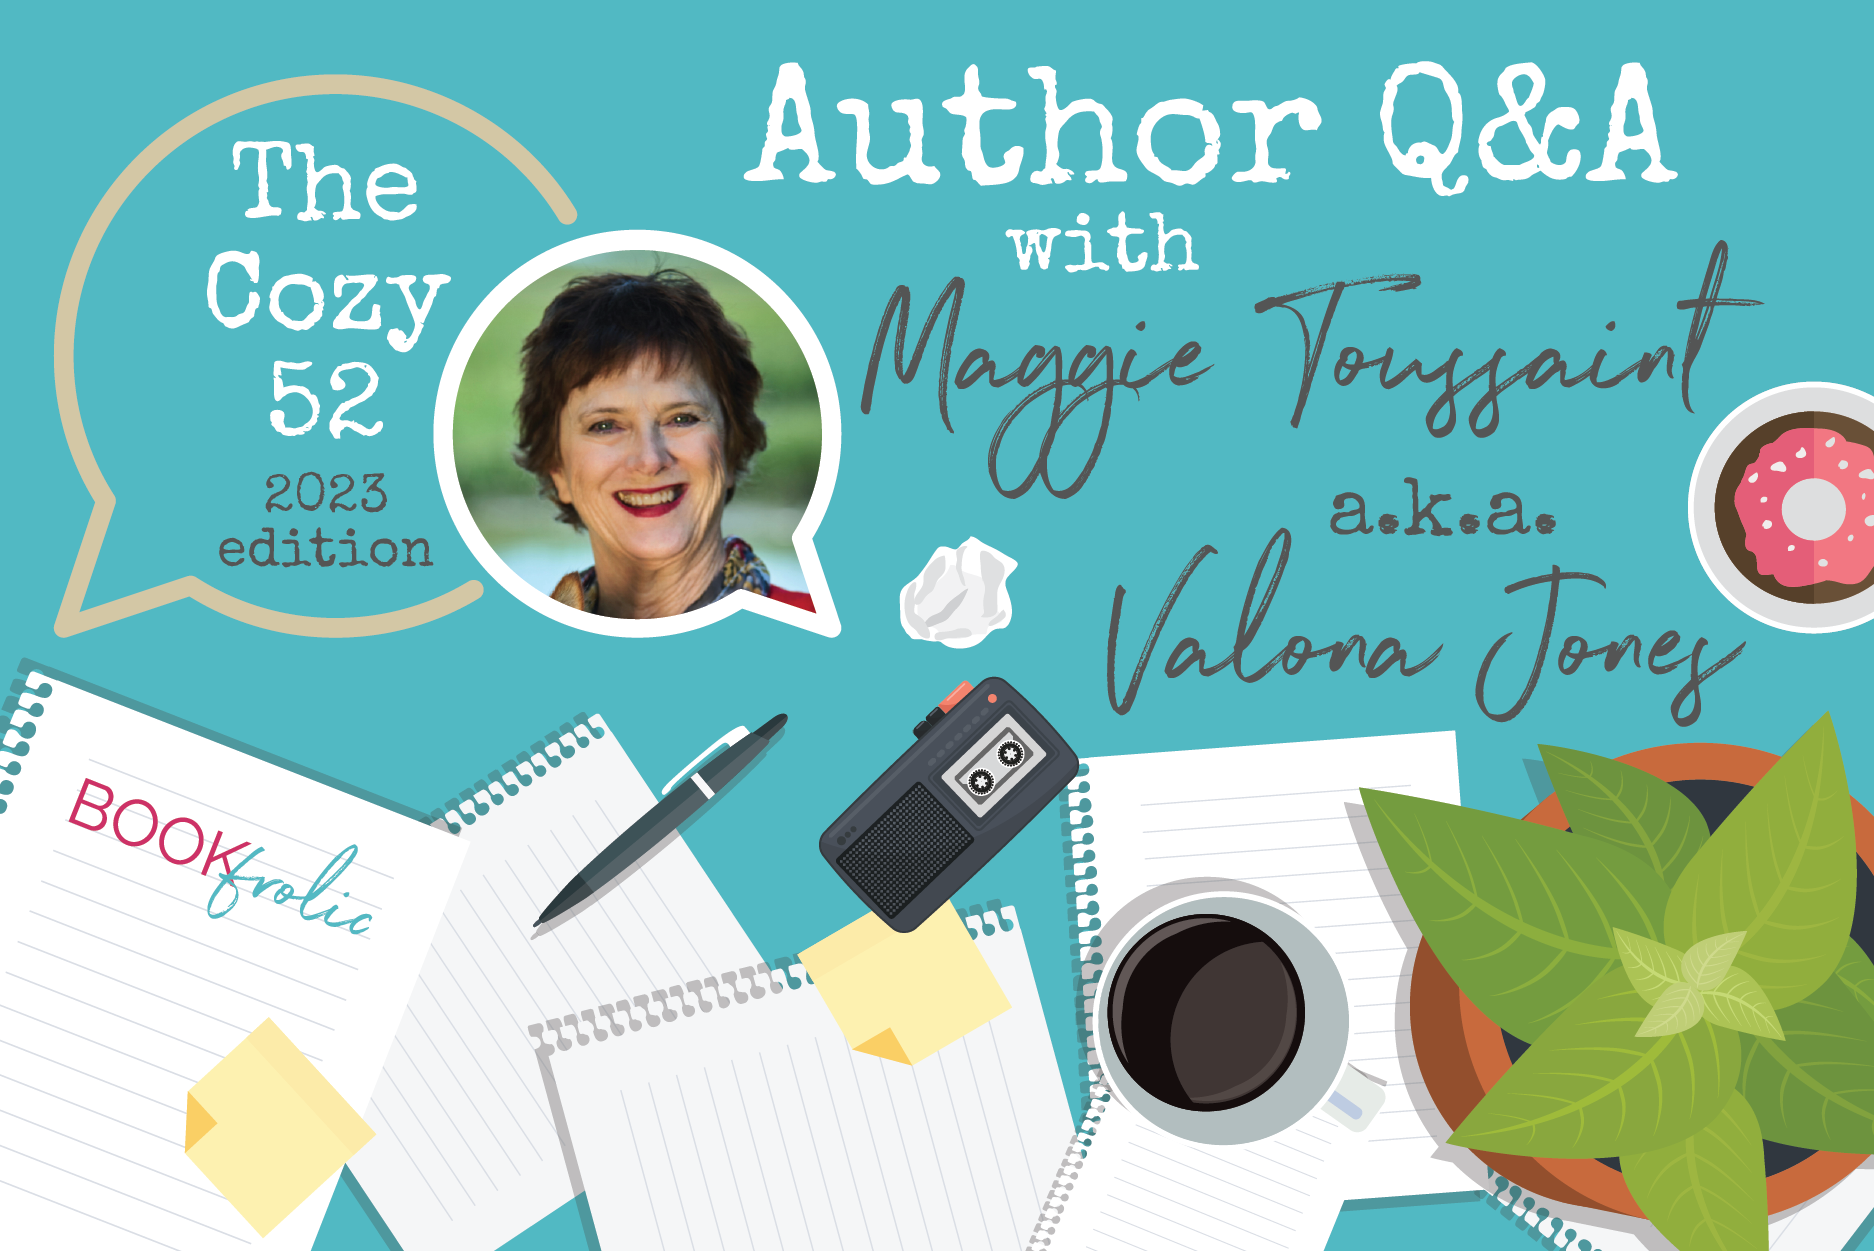 blog banner for interview with Maggie Toussaint aka Valona Jones